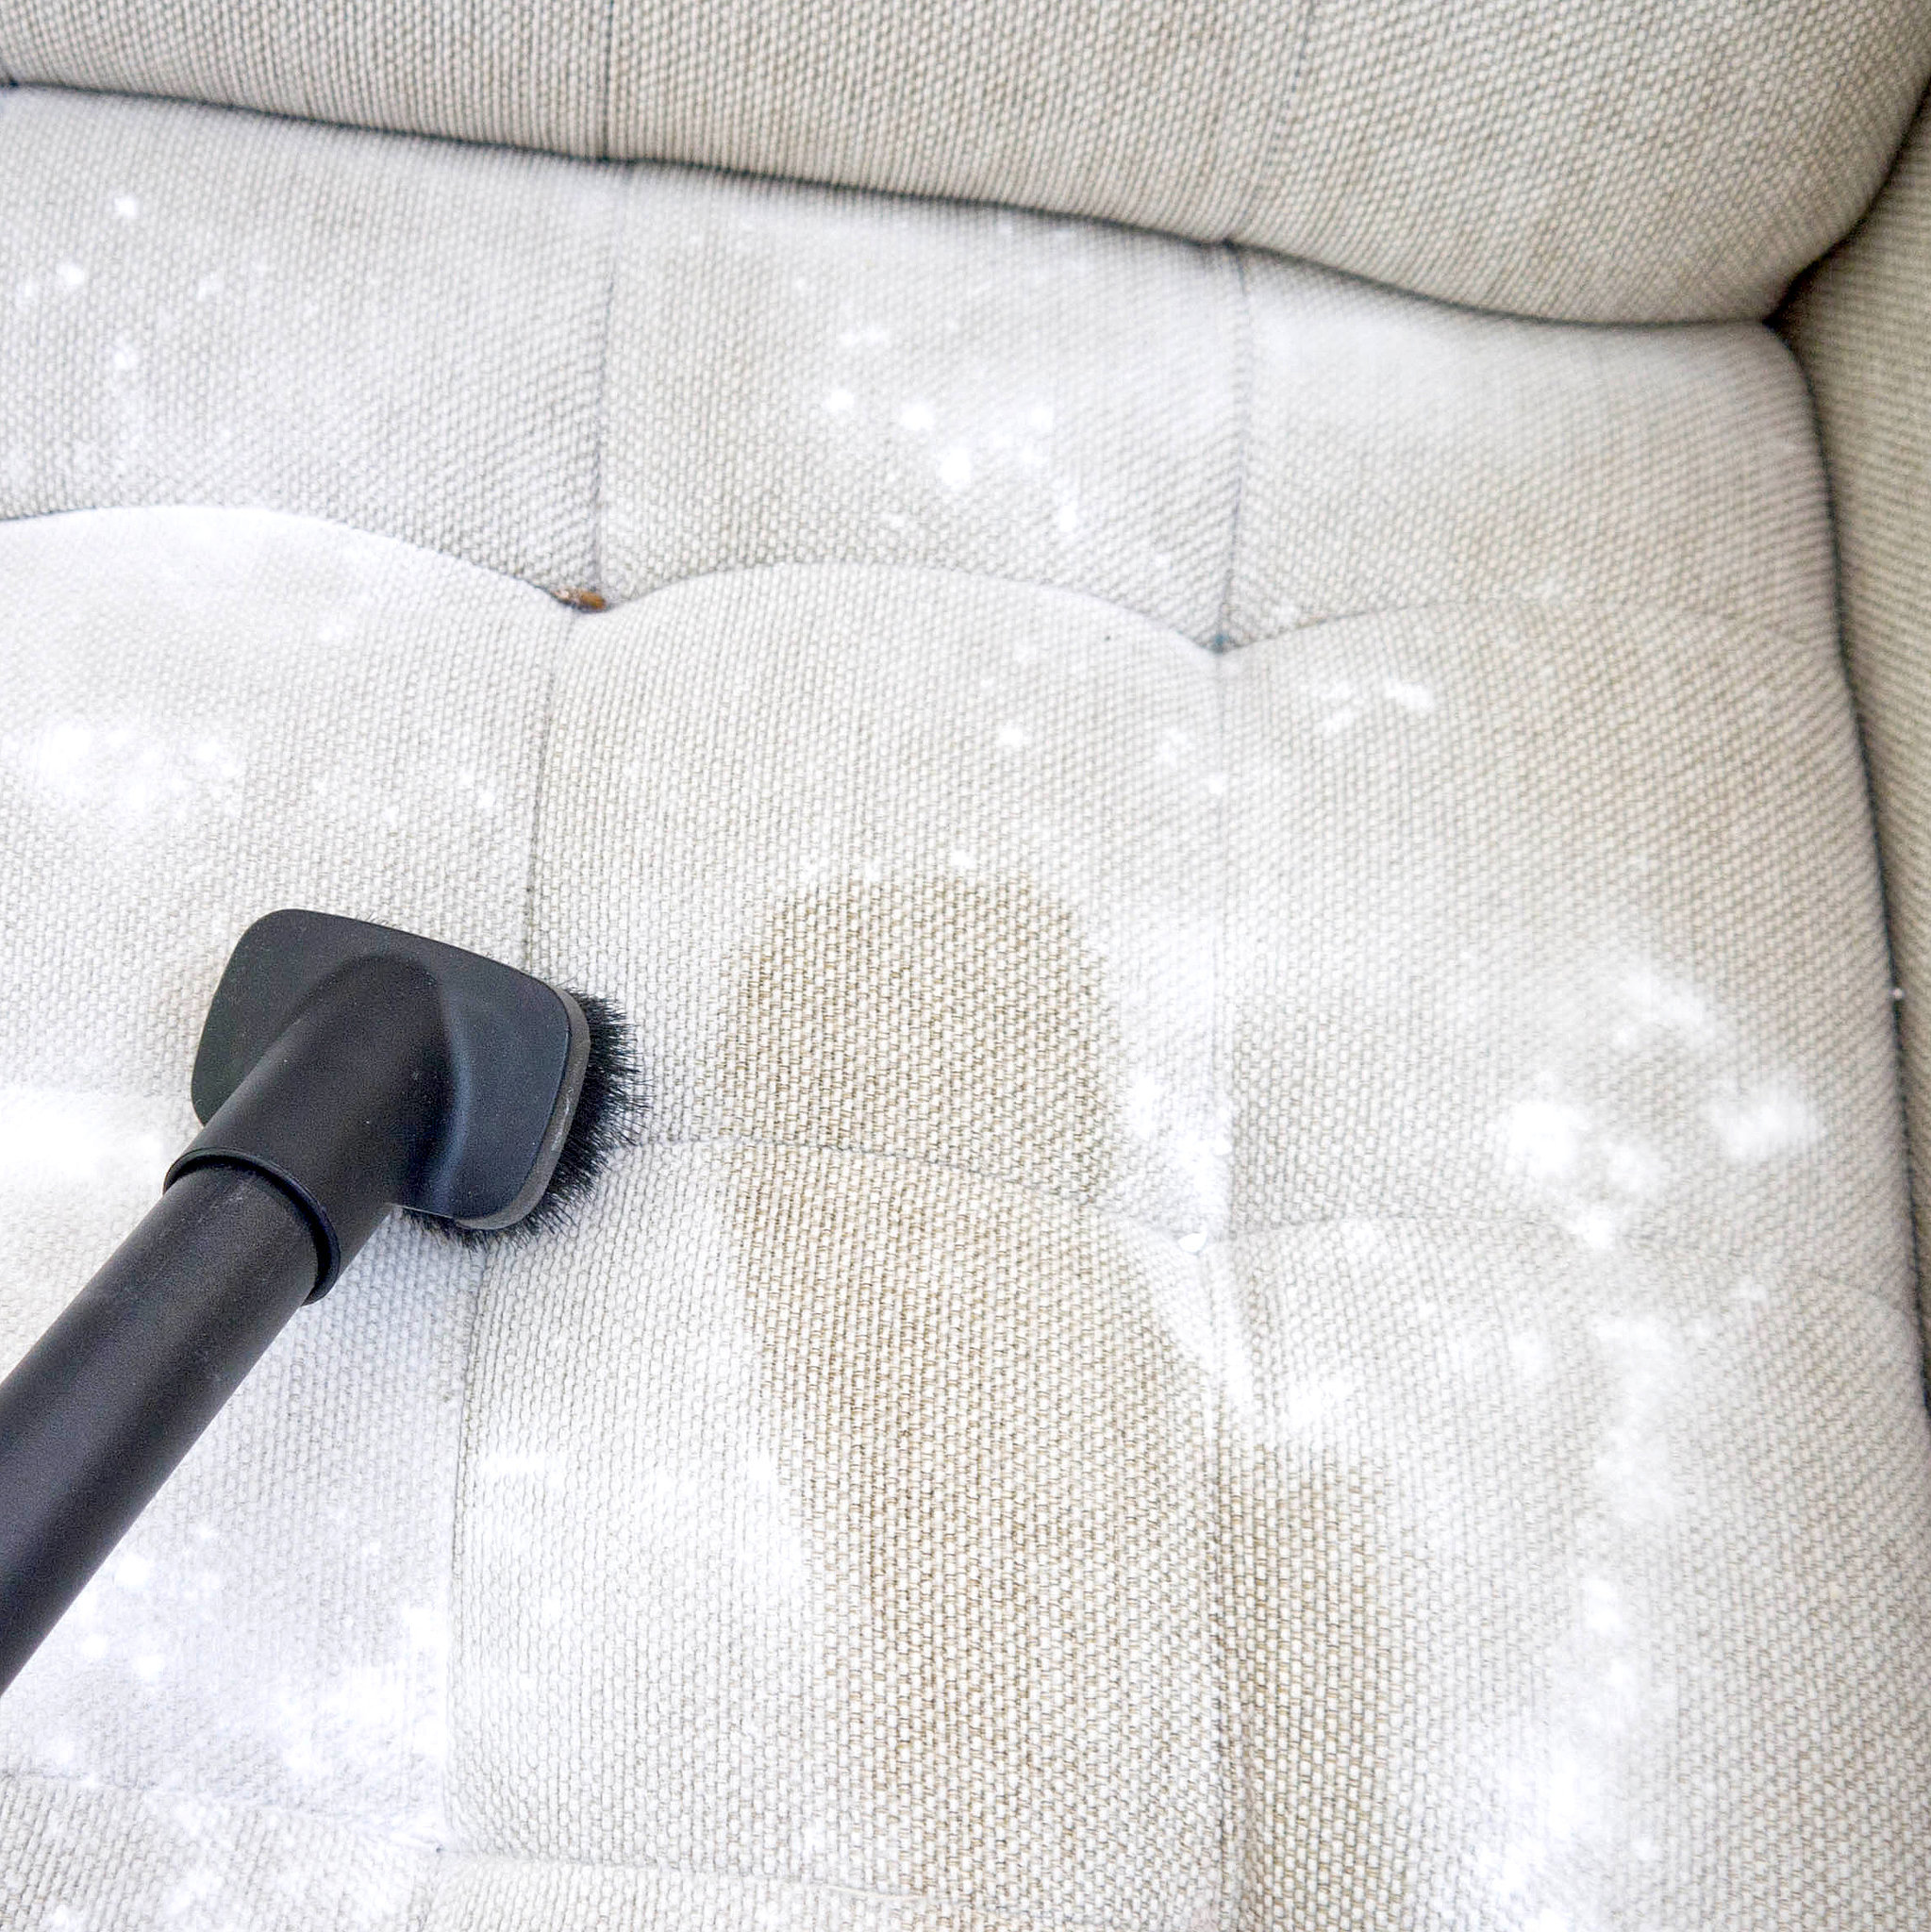 How to Clean a Natural-Fabric Couch | POPSUGAR Smart Living